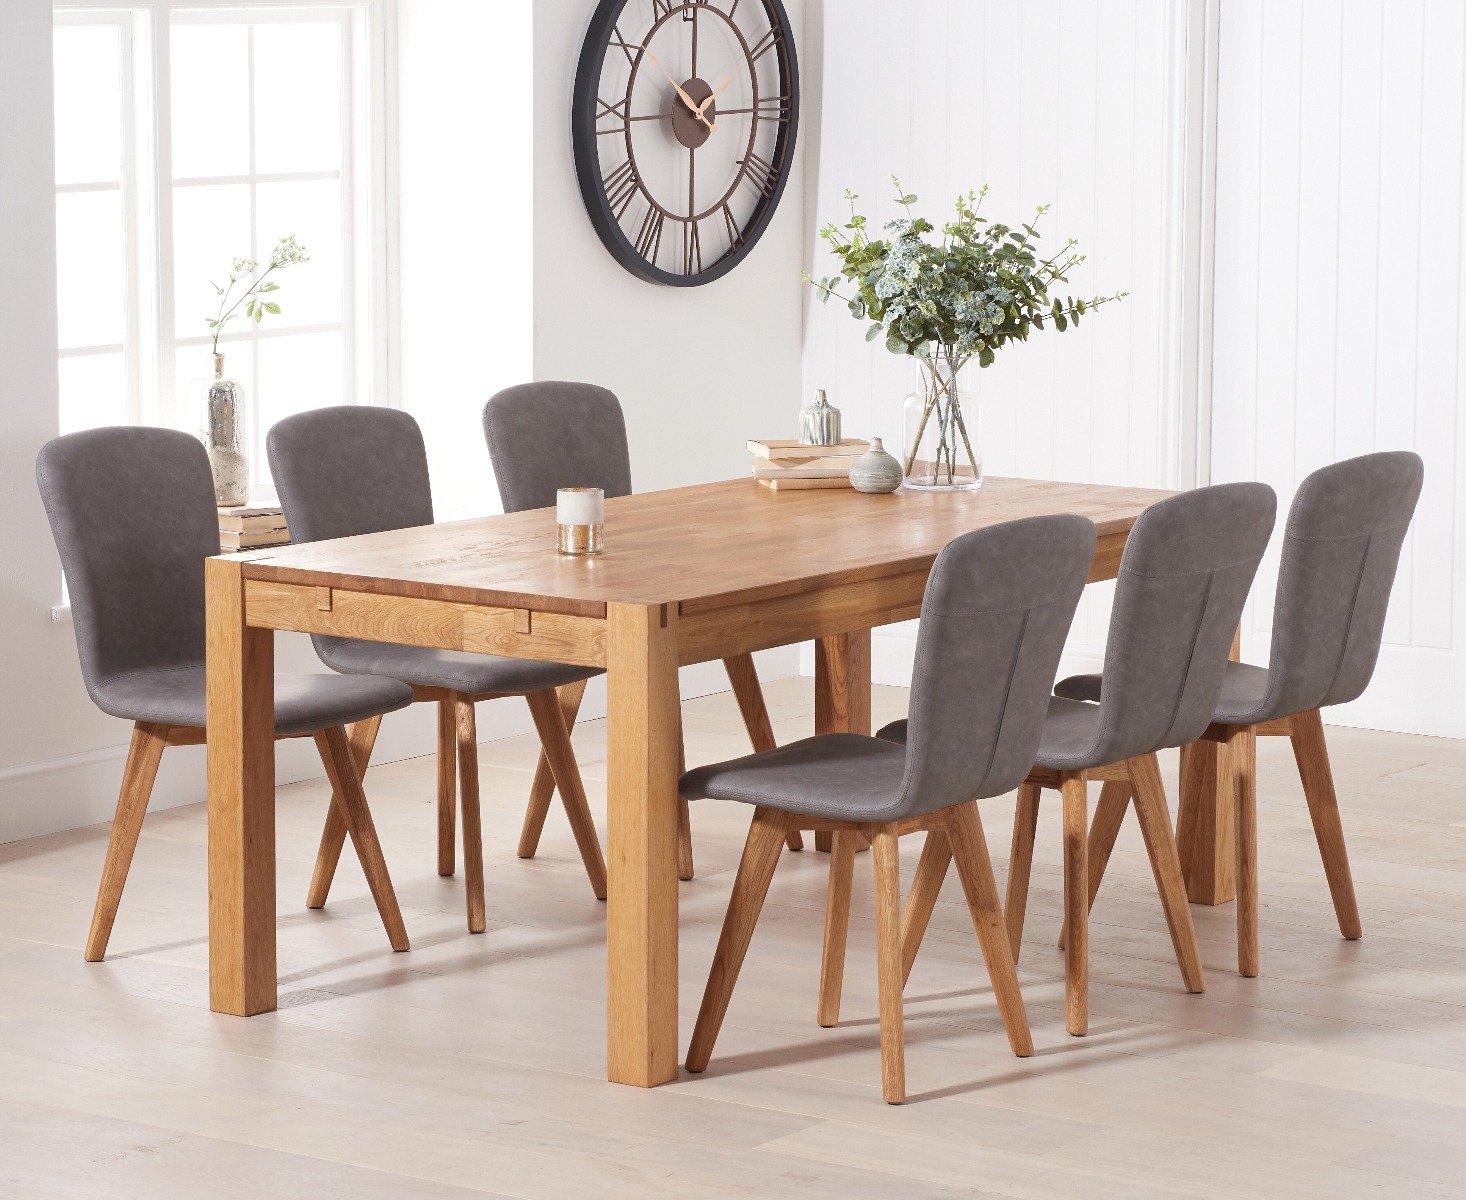 Photo 1 of Thetford 150cm oak dining table with 4 grey ruben chairs